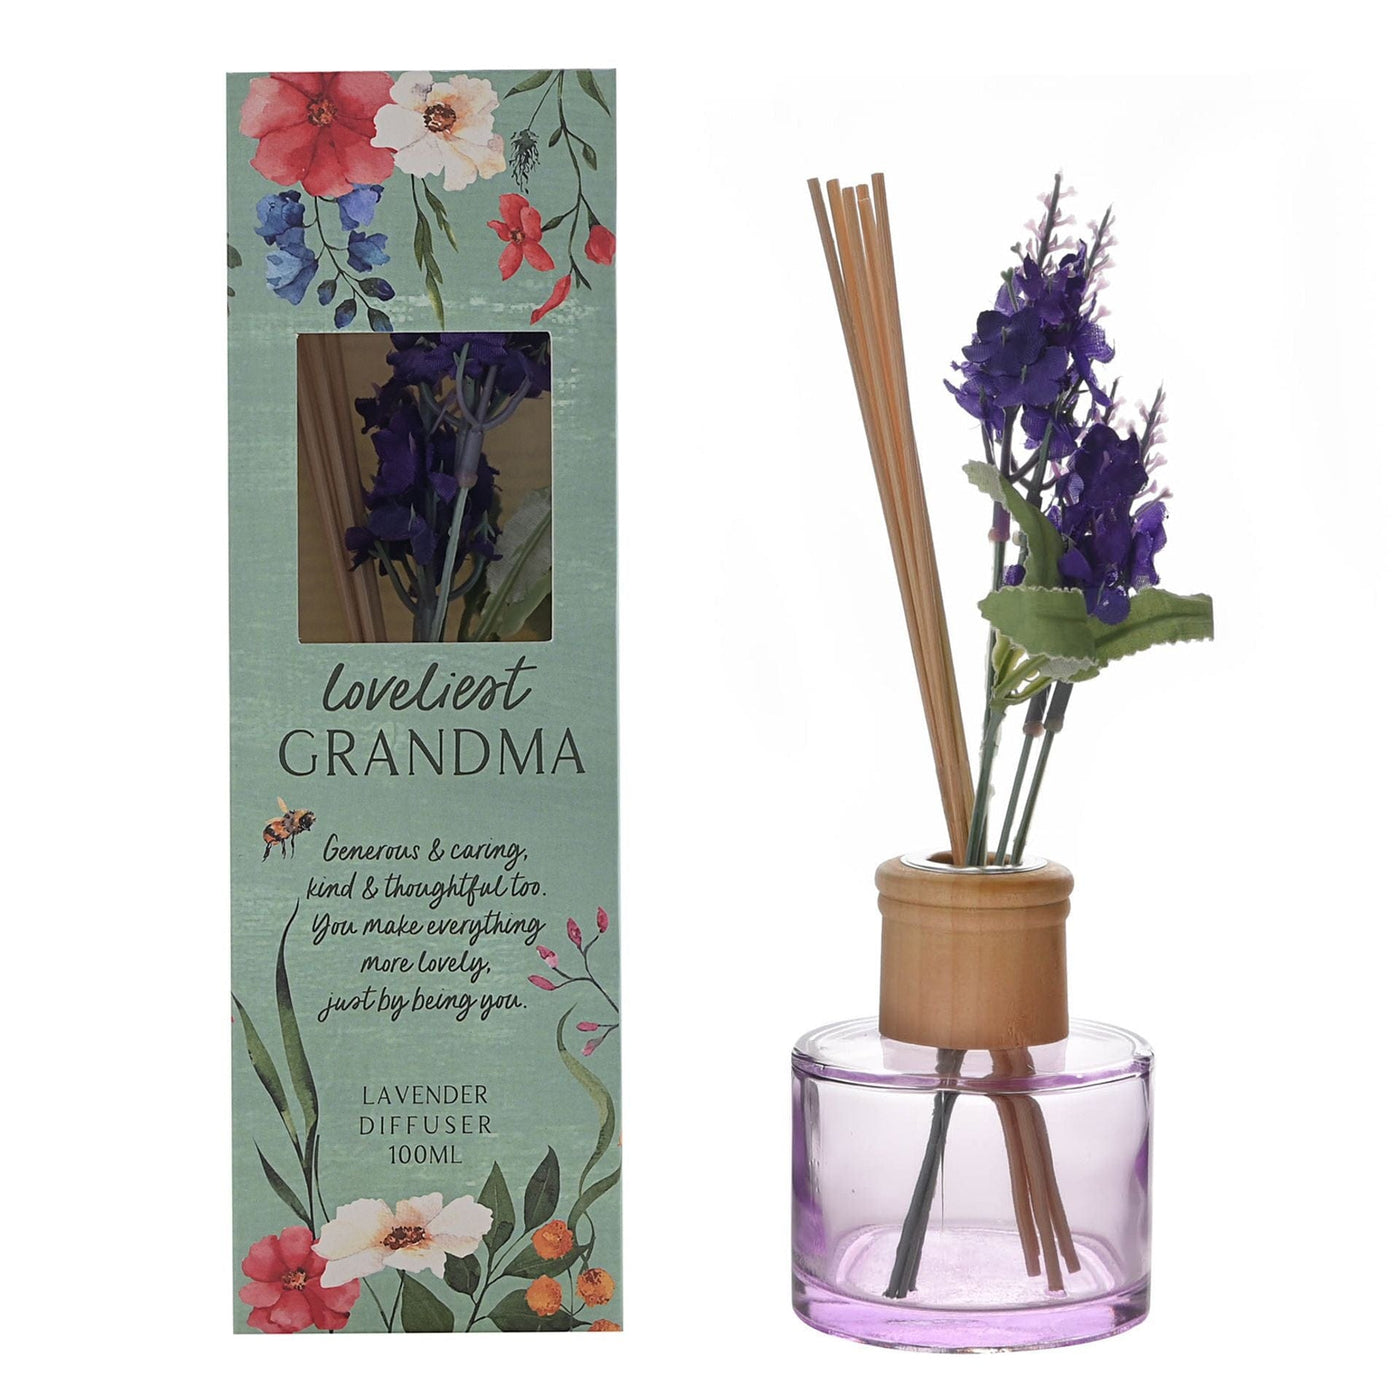 Widdop Gifts Candles & Diffusers Loveliest Grandma Floral Reed Diffuser